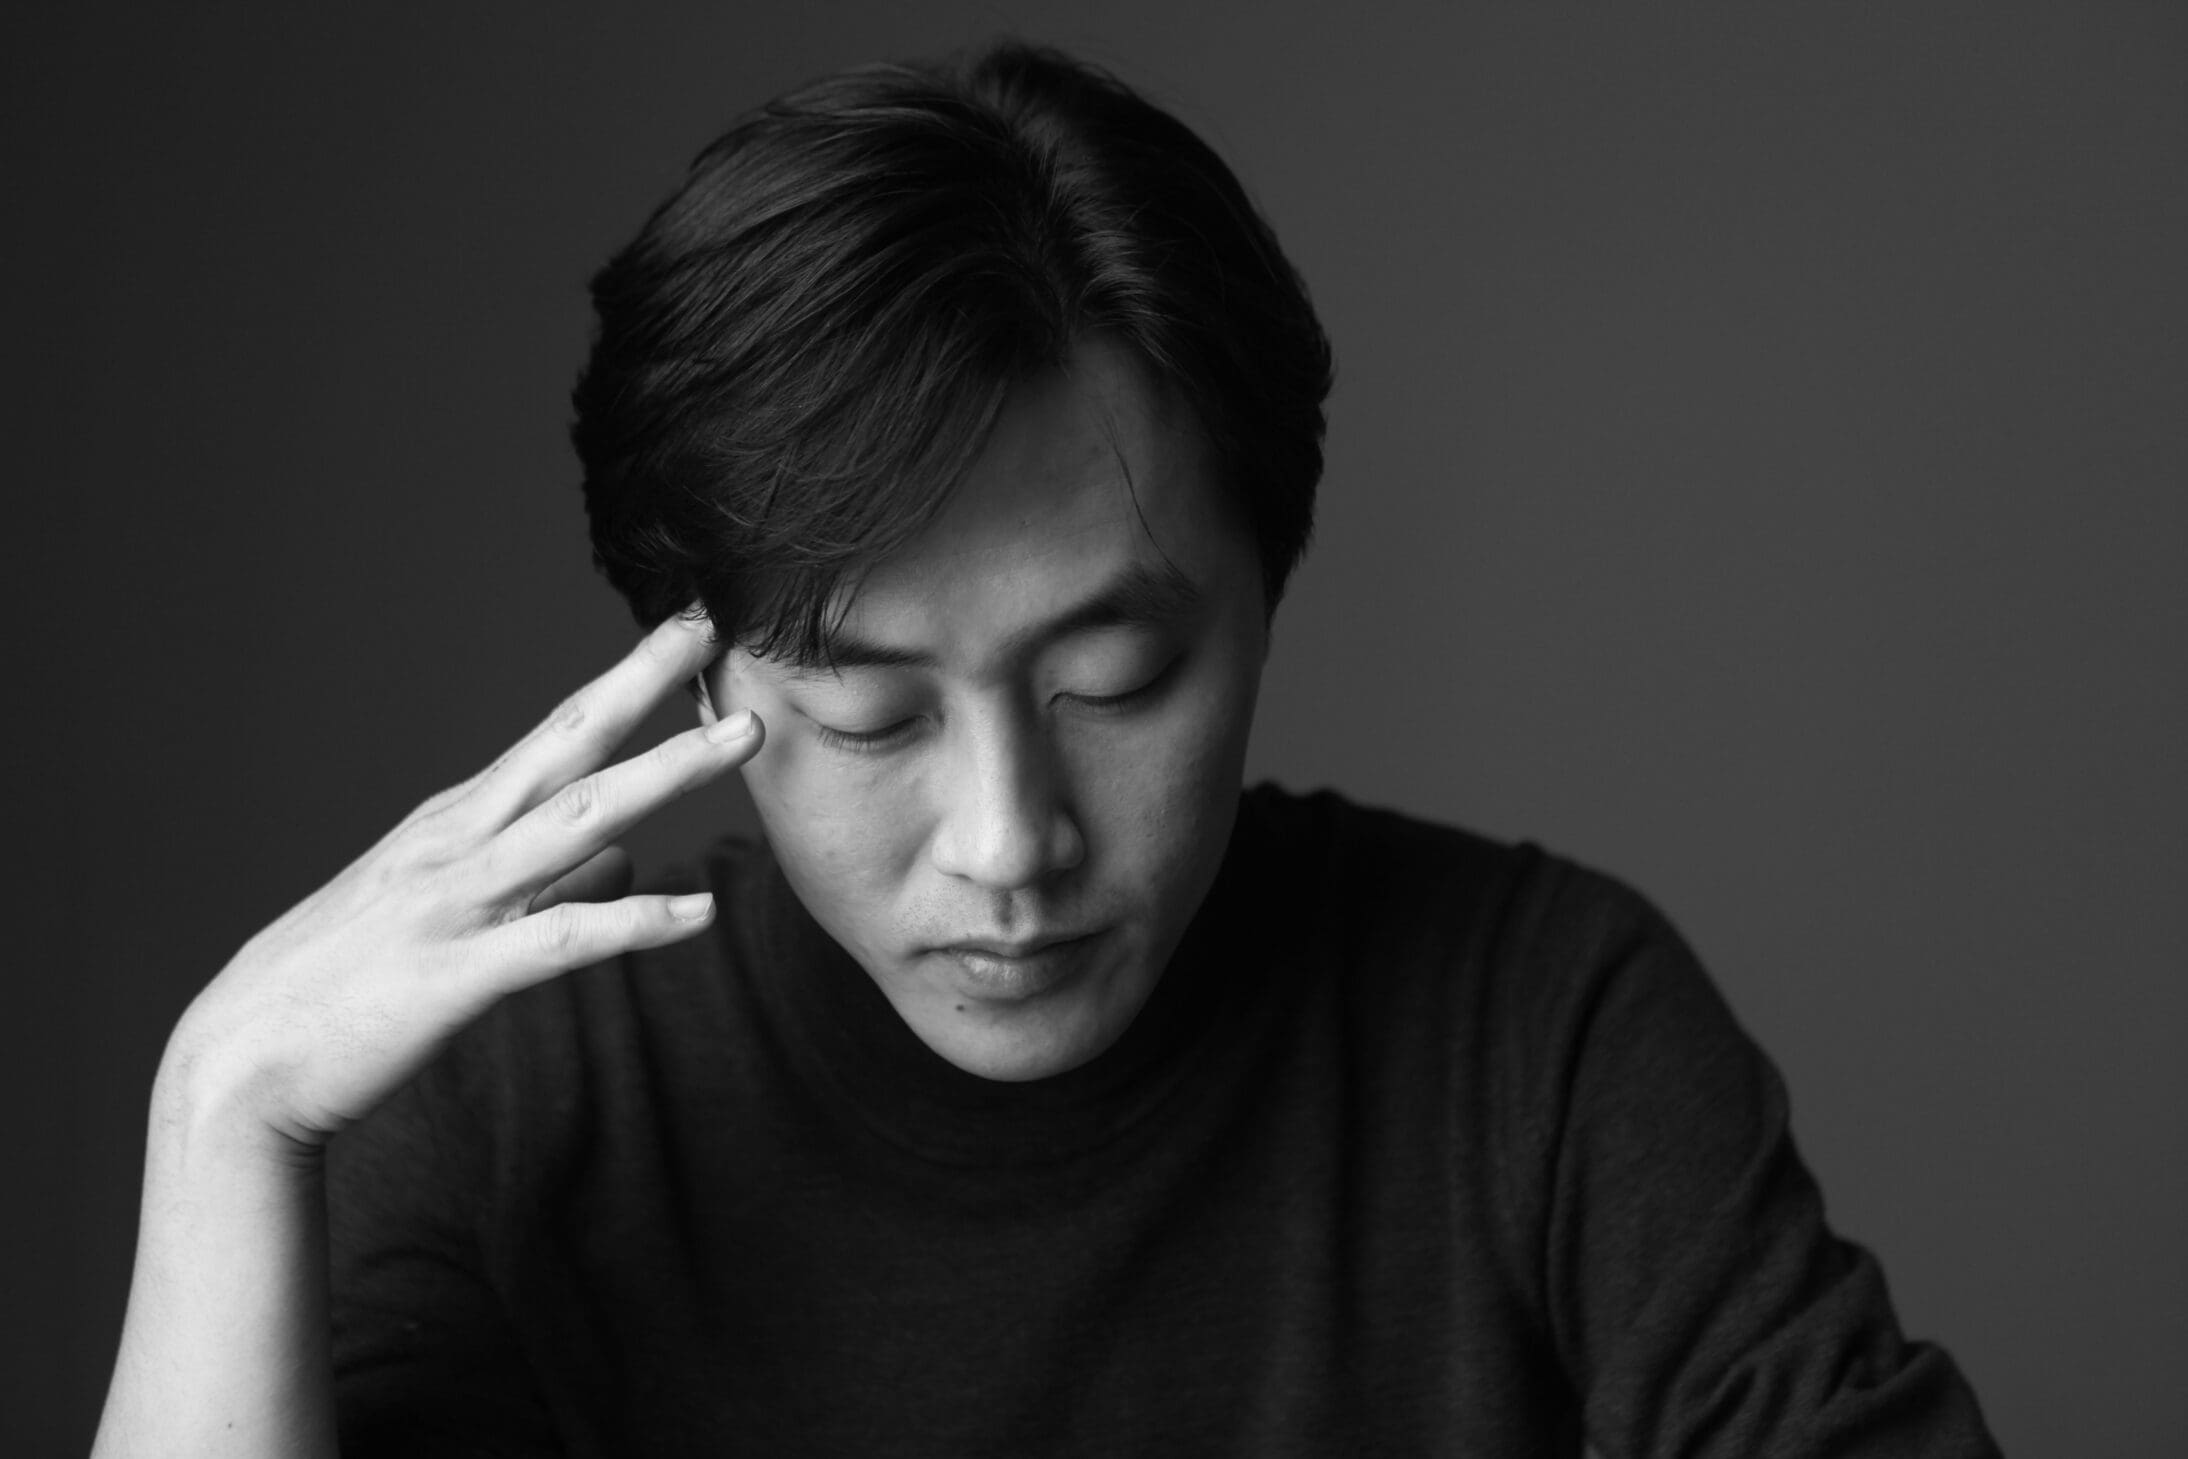 NEC Welcomes Renowned Artist-Teacher Minsoo Sohn to Piano Faculty